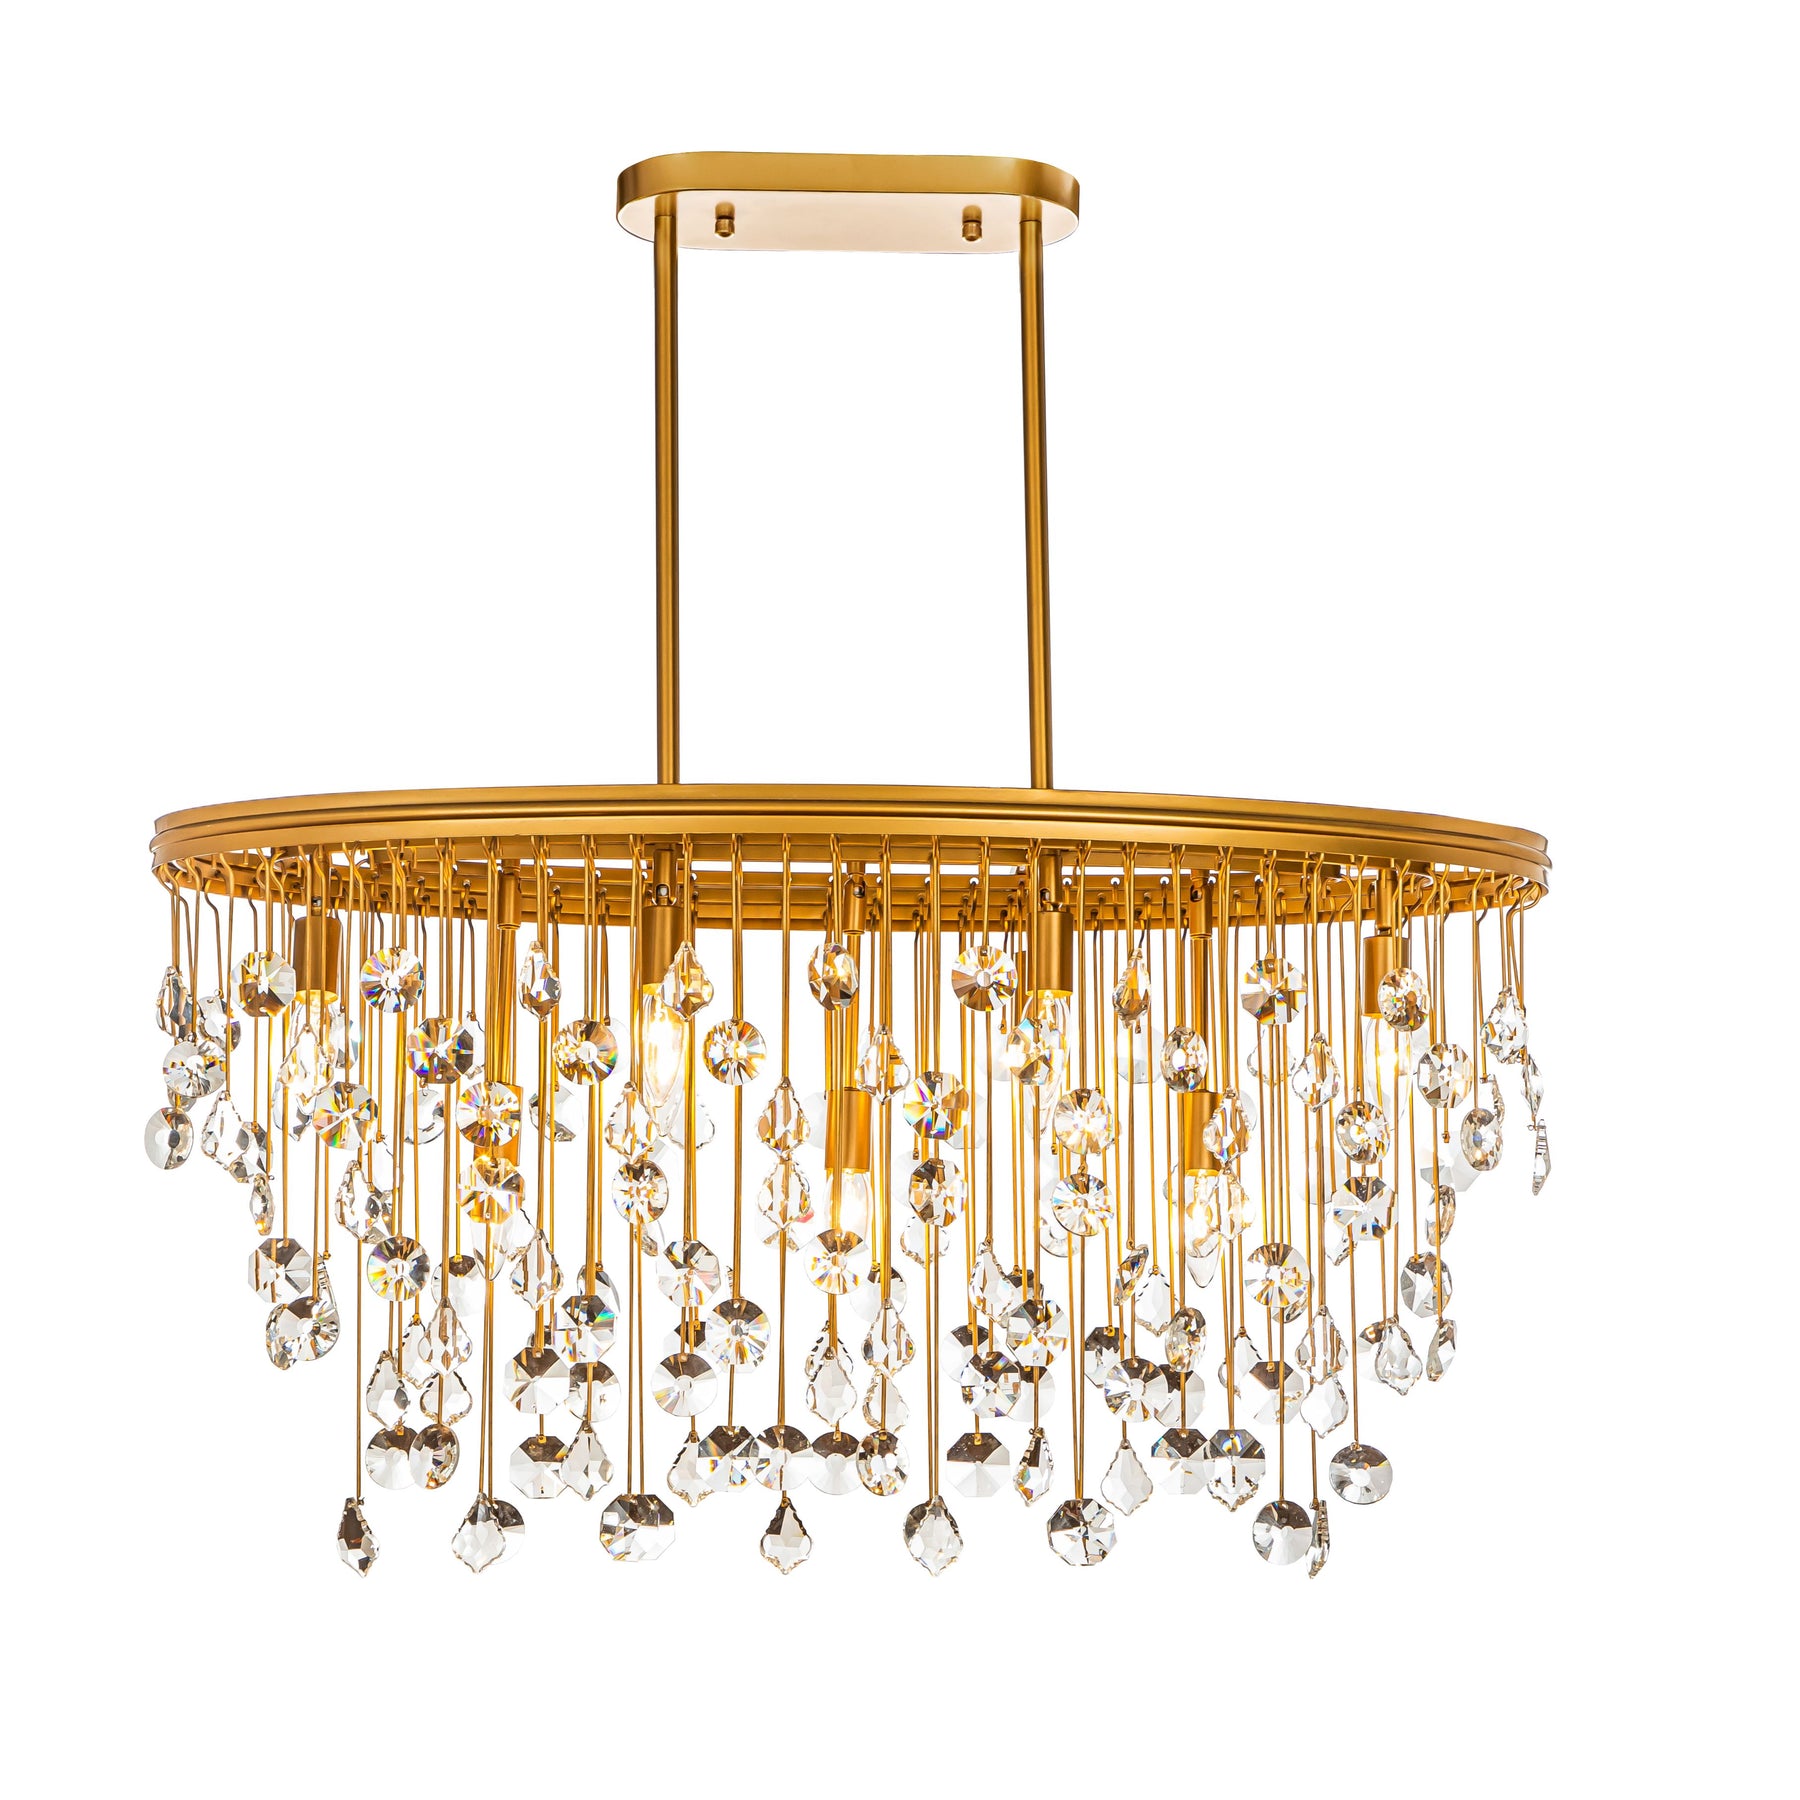 Oval Contemporary Glam Antique Gold Crystal Chandelier